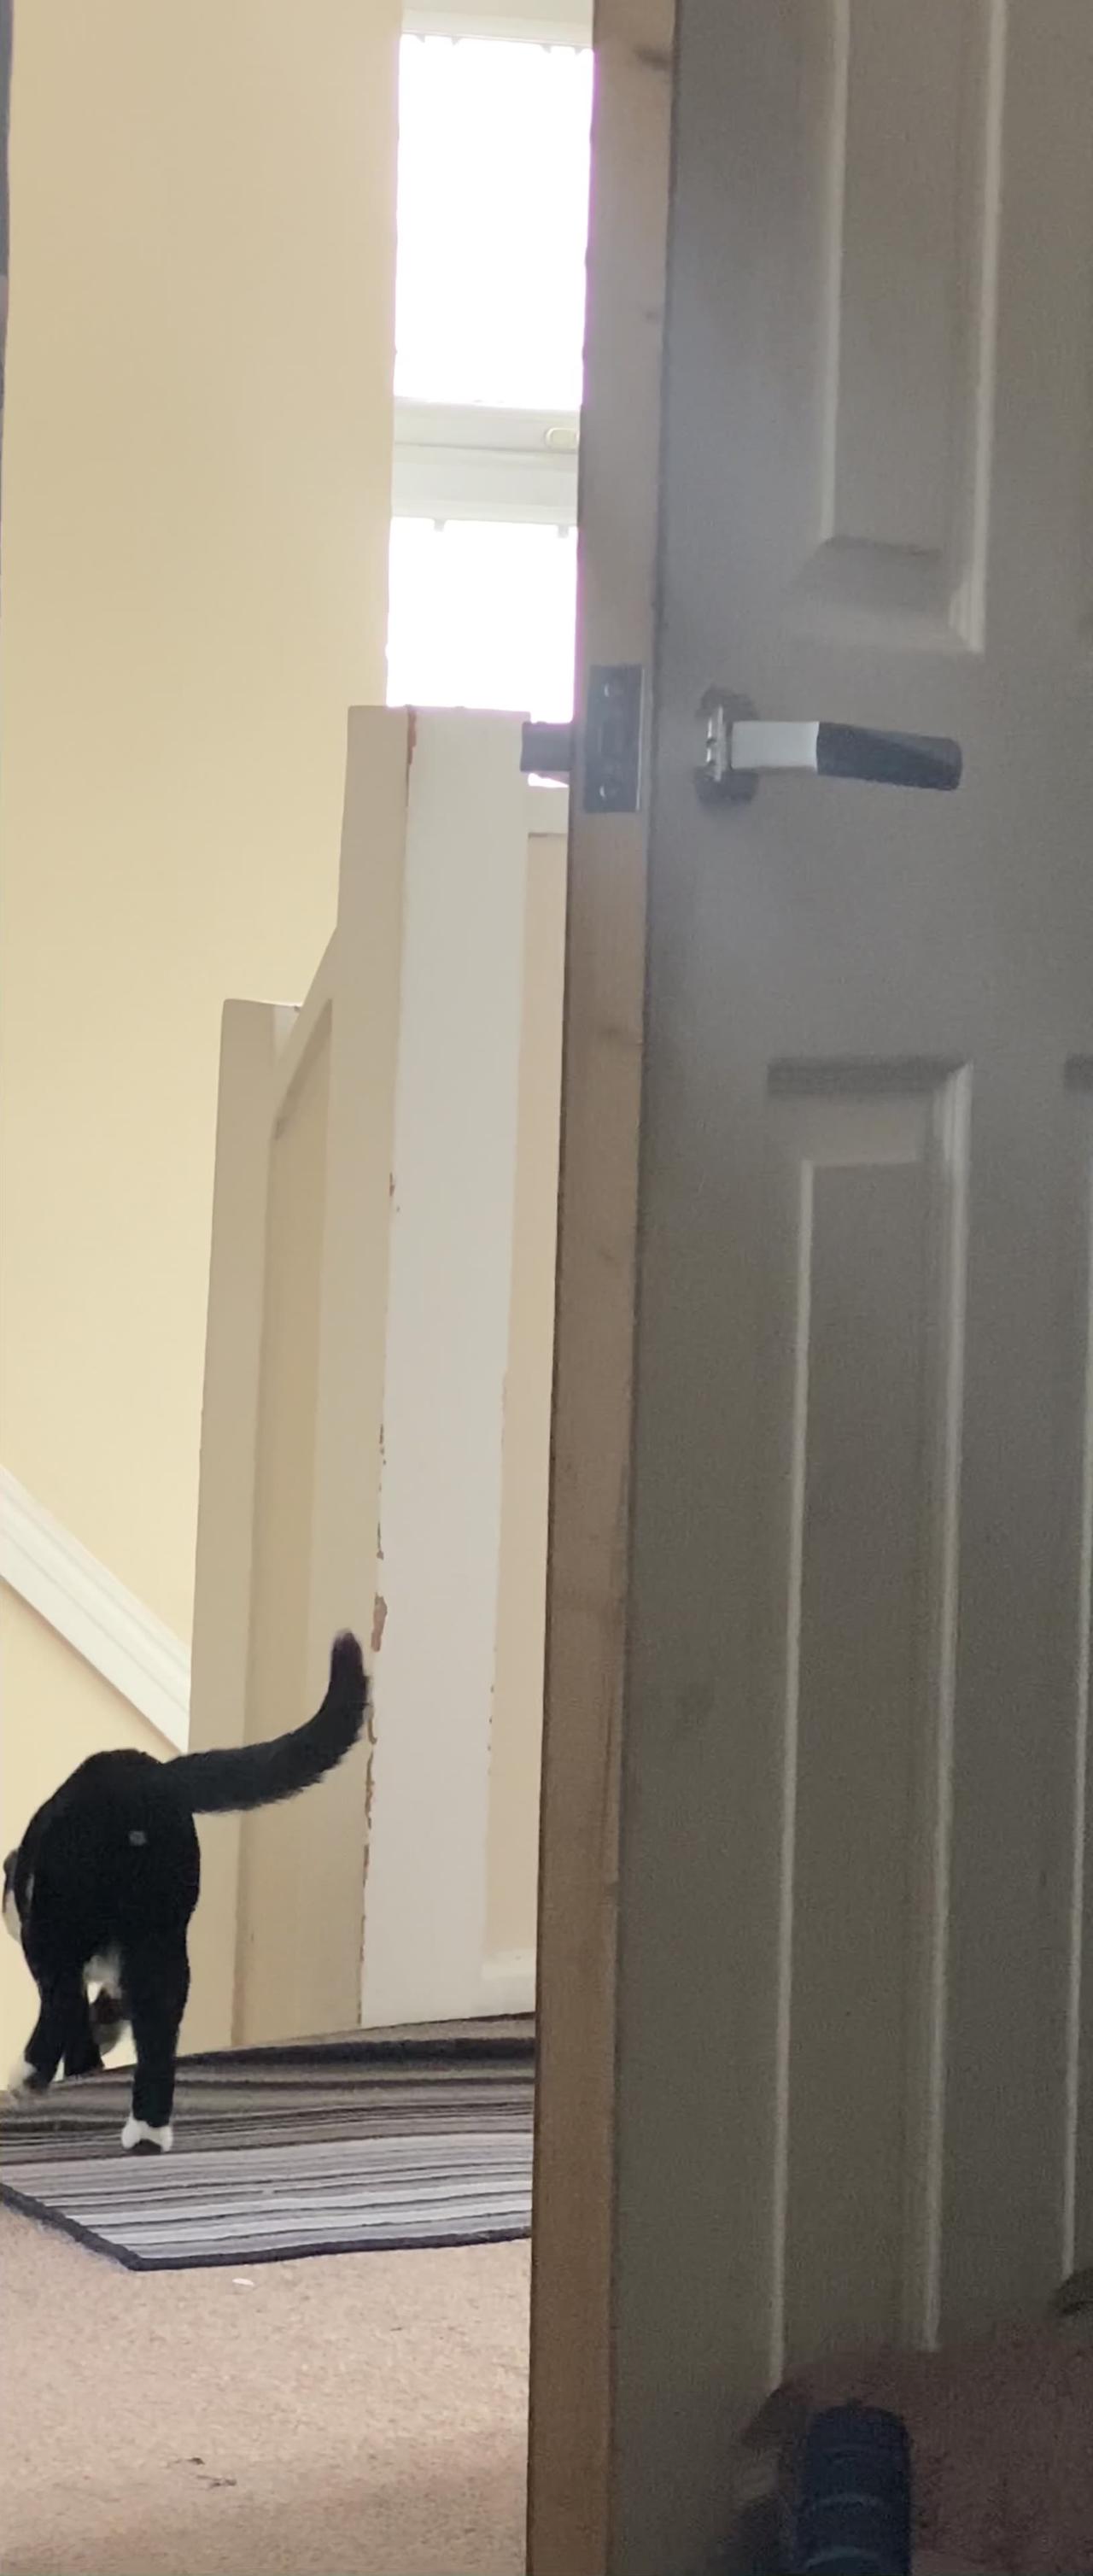 Crazy one eared cat learns how to open doors